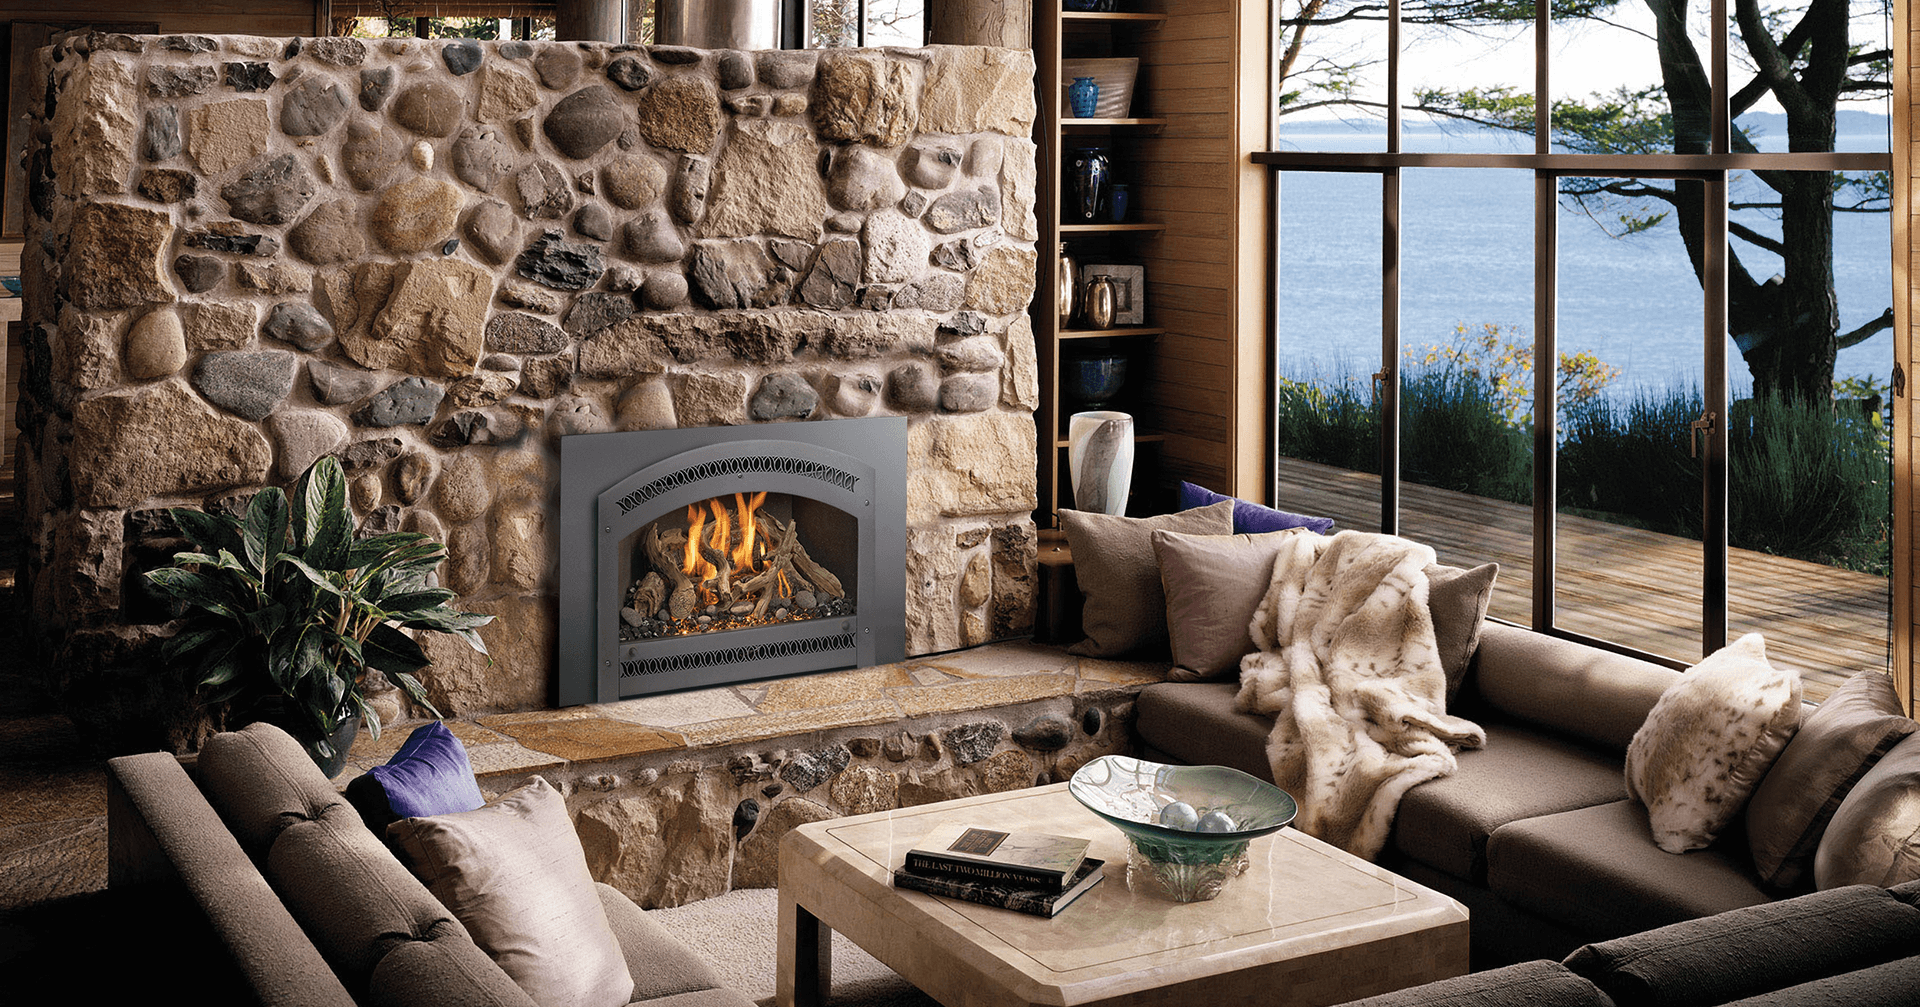 Stone wall fireplace by Luce's Chimney and Stove Shop in Swanton, OH.